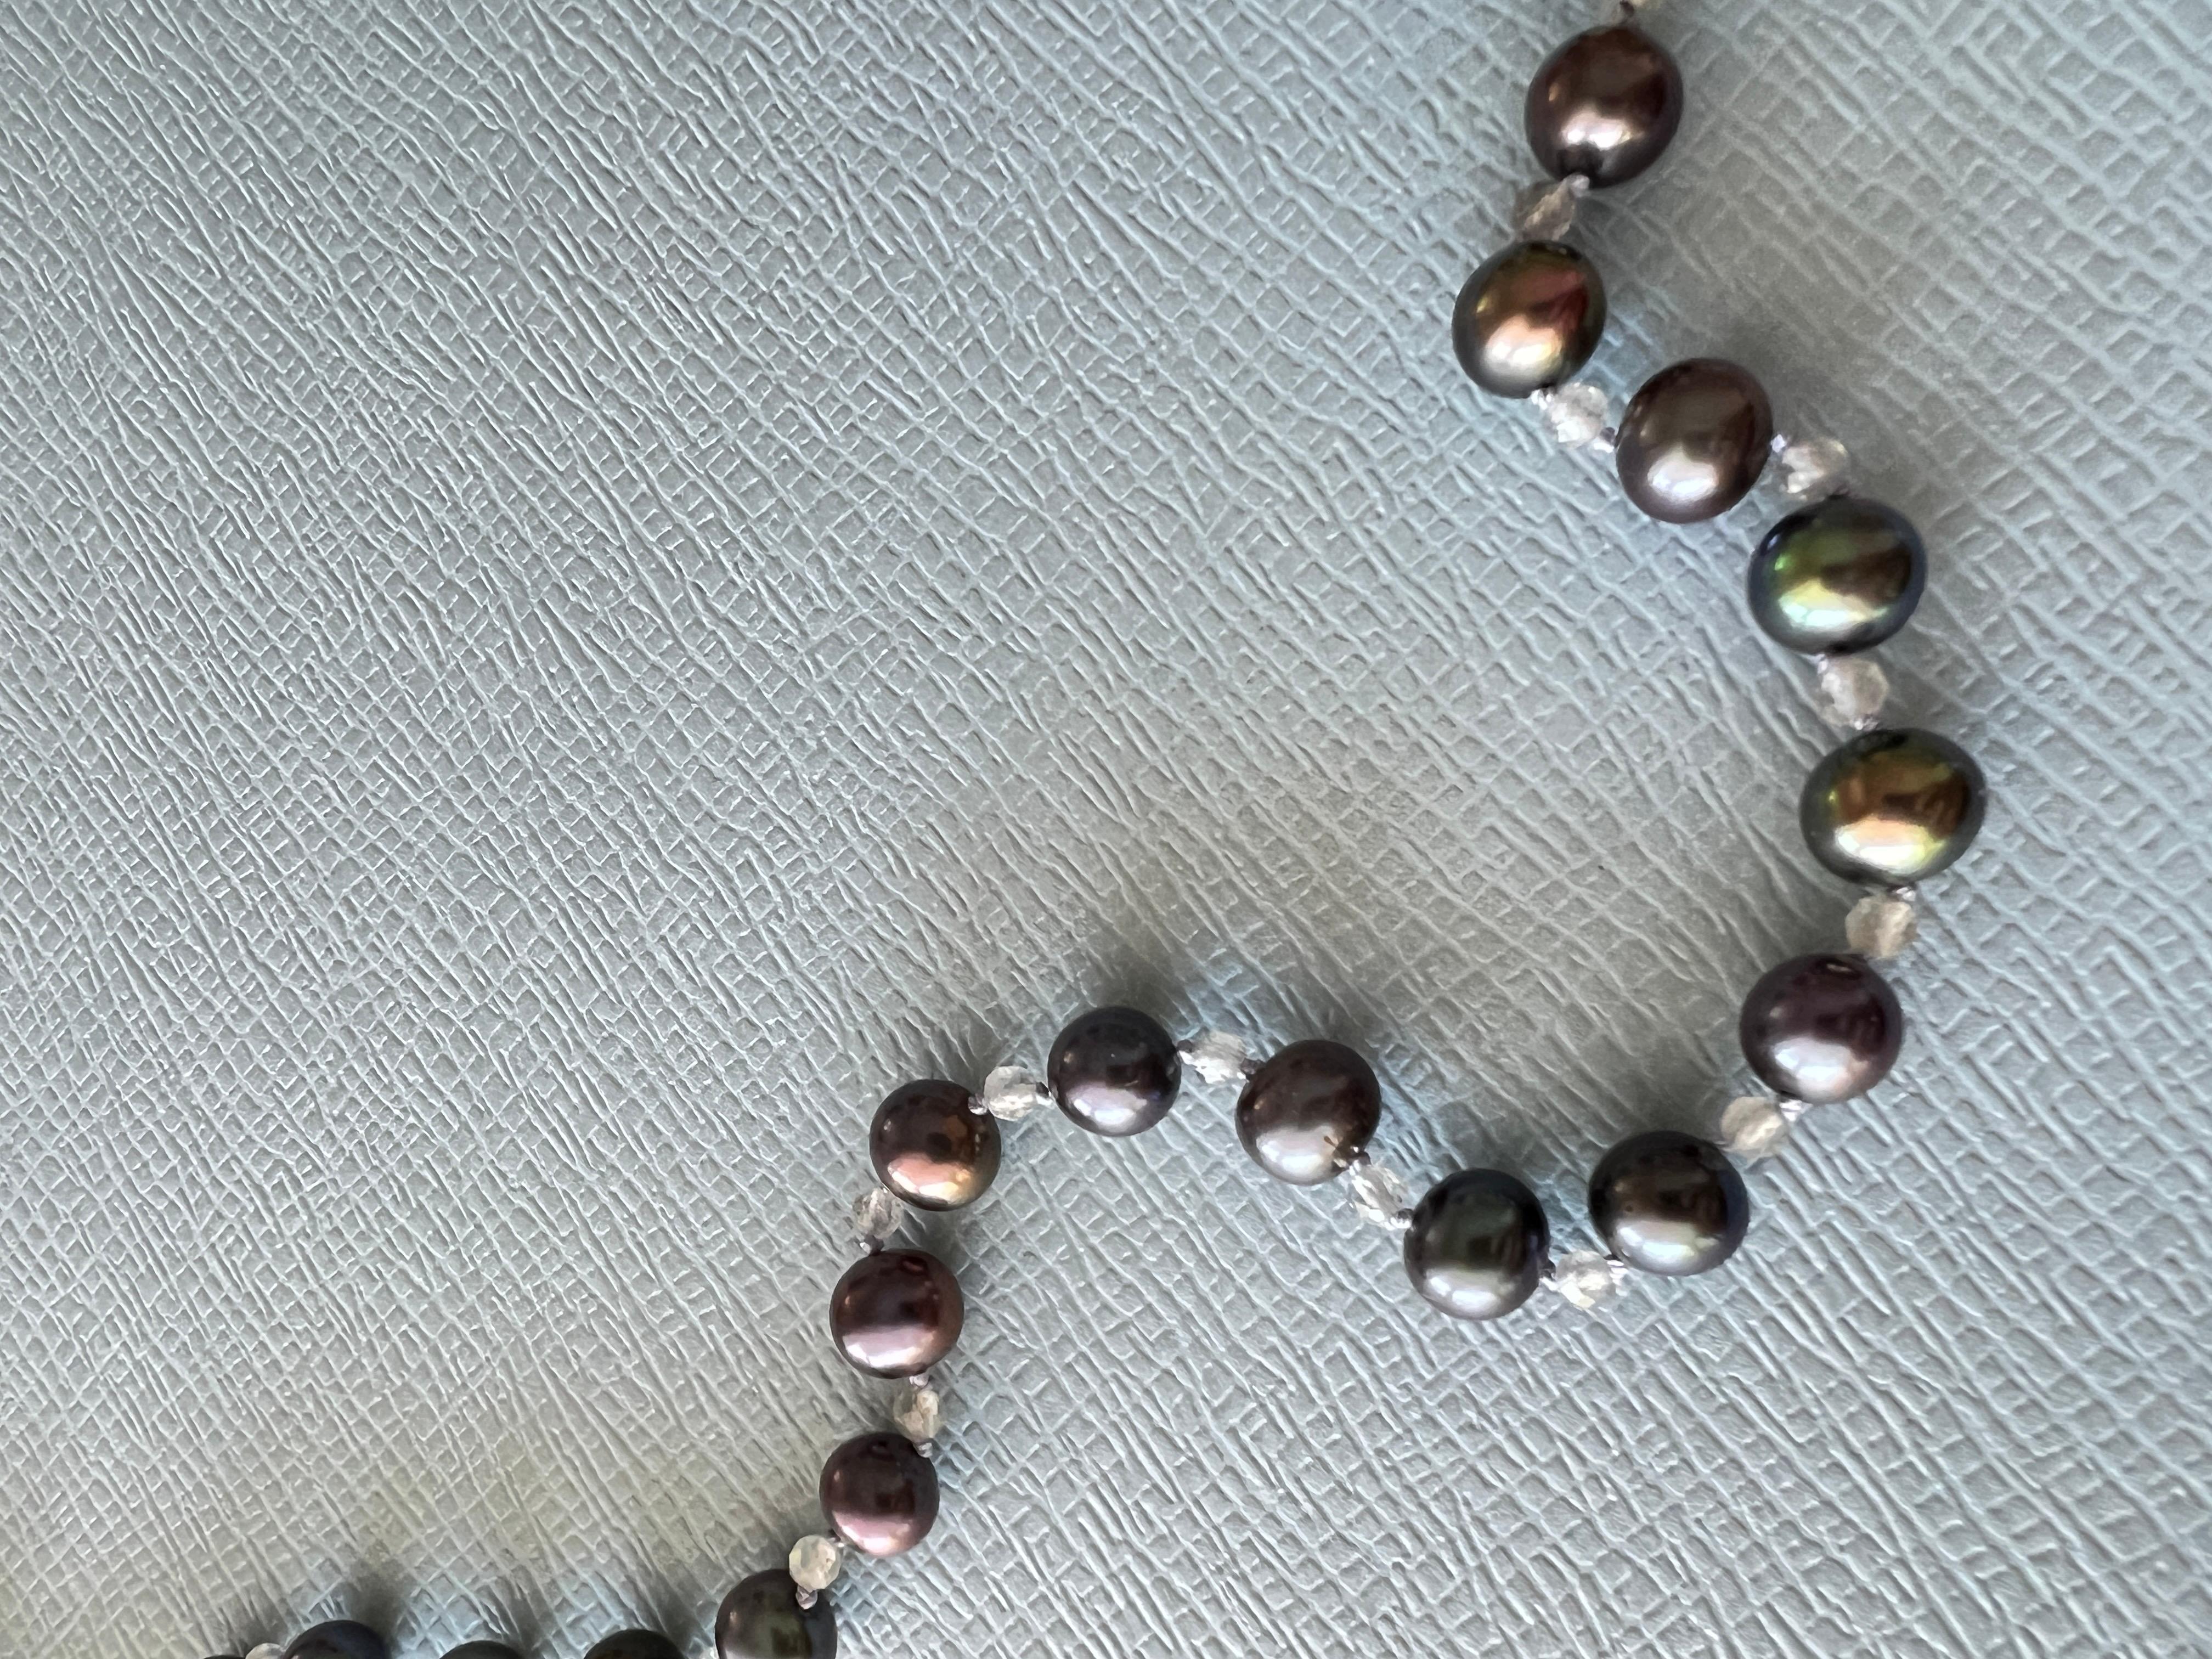  Black Pearl Labradorite Mid-Length Necklace with Gold Filled Clasp J Dauphin  In New Condition For Sale In Los Angeles, CA